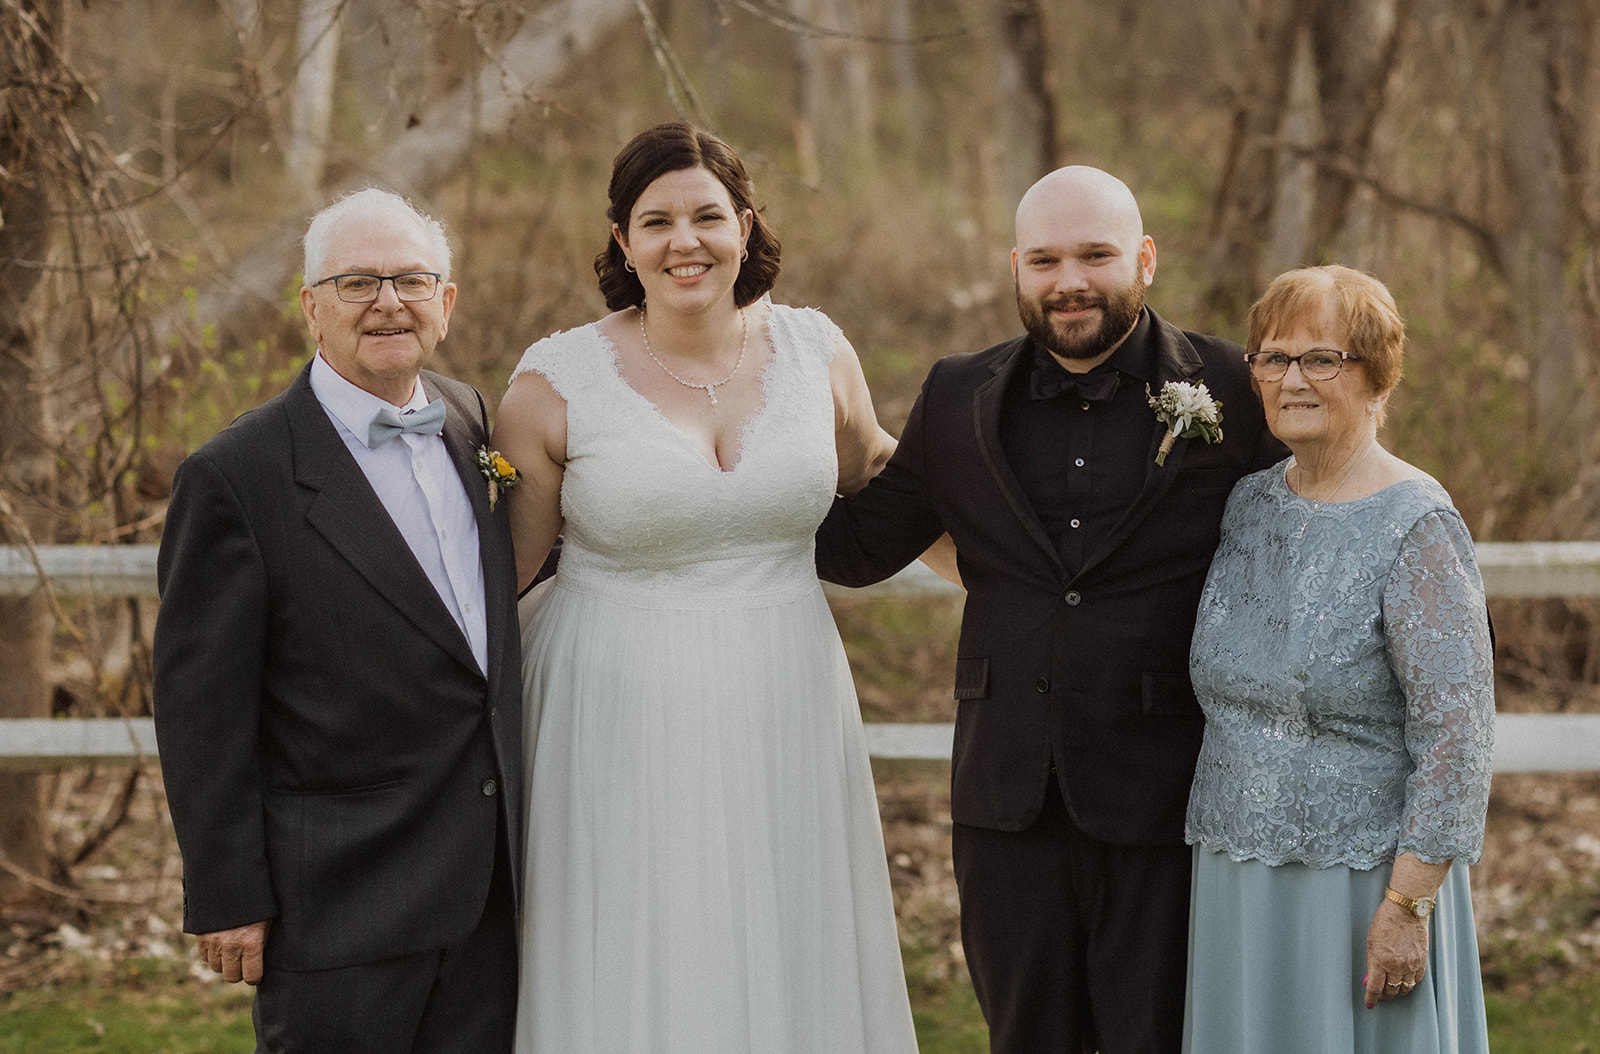 Bride and groom pose with their family outside their dreamy Upstate New York wedding venue